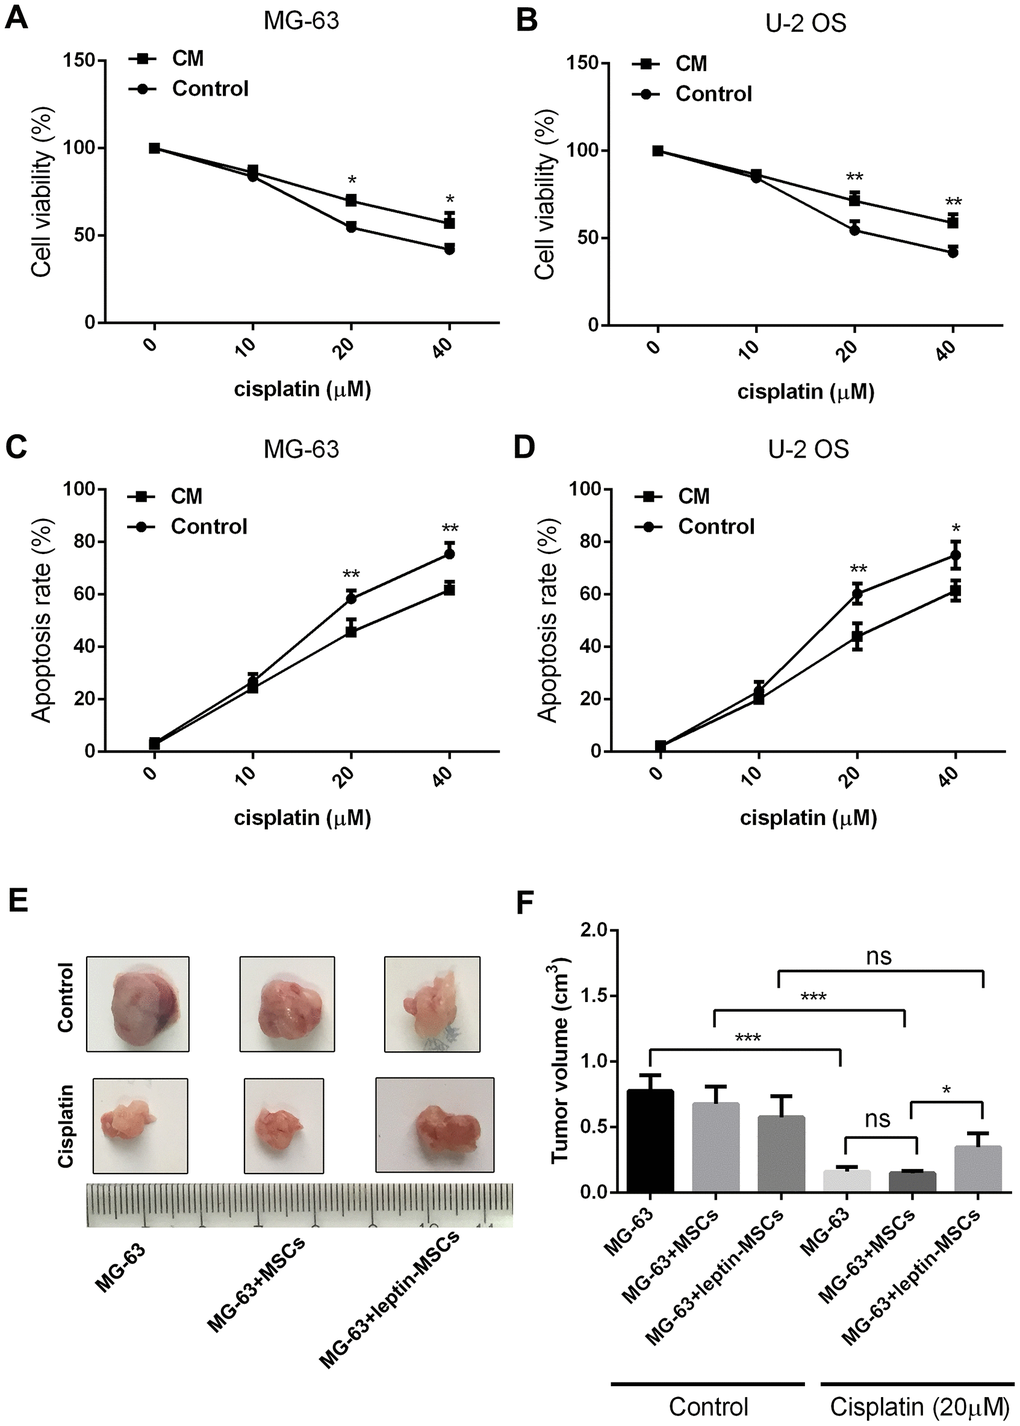 CM from leptin-conditioned MSCs promotes chemoresistance in OS cells. Results of CCK8 viability assays in cisplatin-treated MG-63 cells (A) and U-2 OS cells (B) incubated with CM collected from MSCs cultured in the presence (CM) or absence (Control) of leptin. *pC) and U-2 OS cells (D) incubated with CM collected from MSCs cultured in the presence (CM) or absence (Control) of leptin. *pE) Representative images of human OS xenografts excised from nude mice. (F) Quantification of tumor volumes at 21 days post-implantation. *p